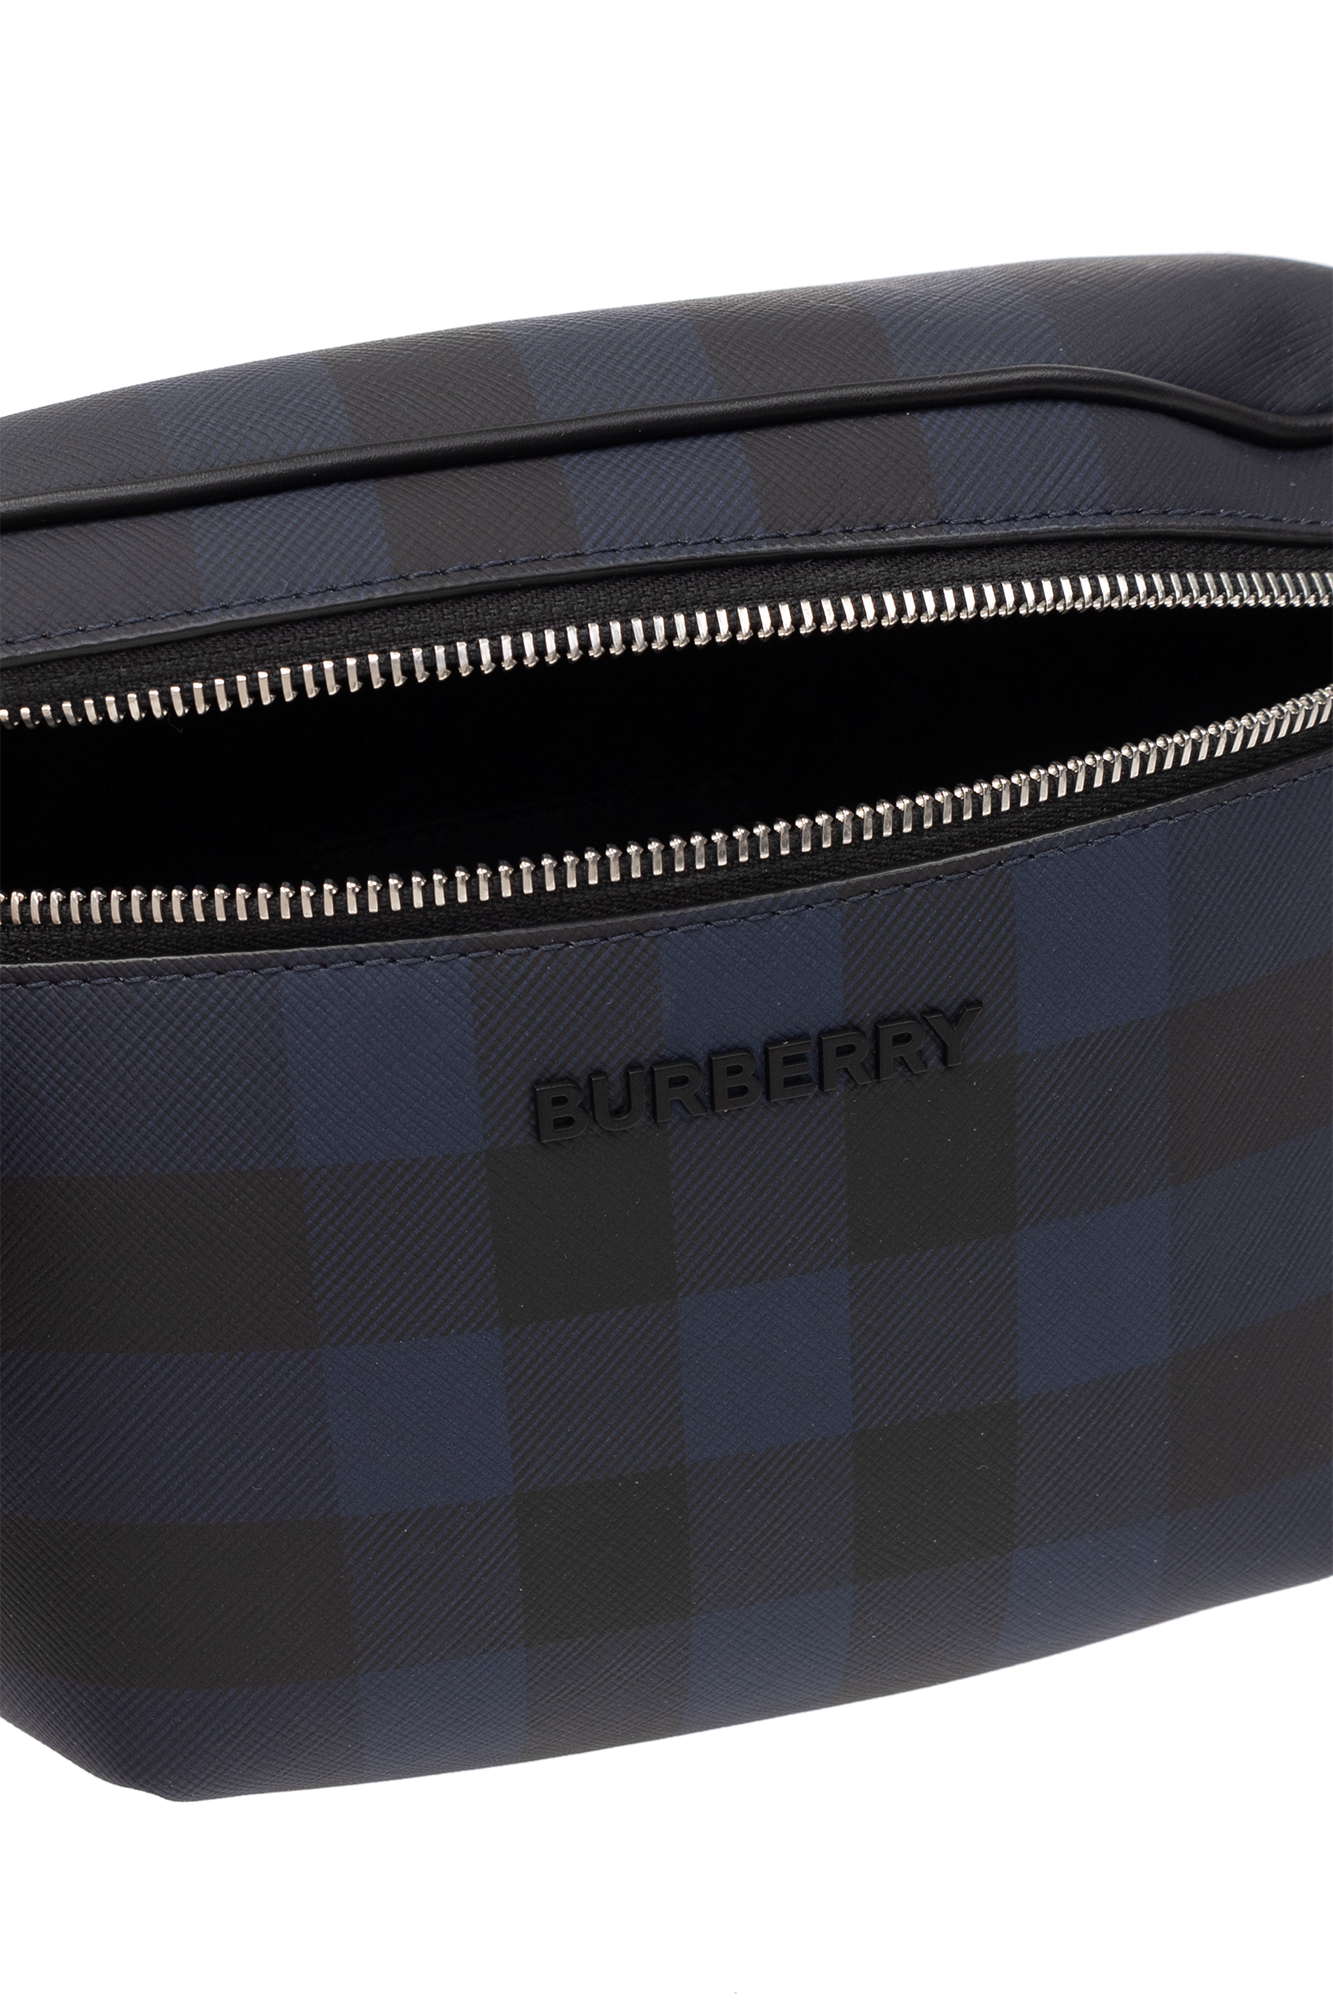 Burberry London Made In China Poland, SAVE 55% 